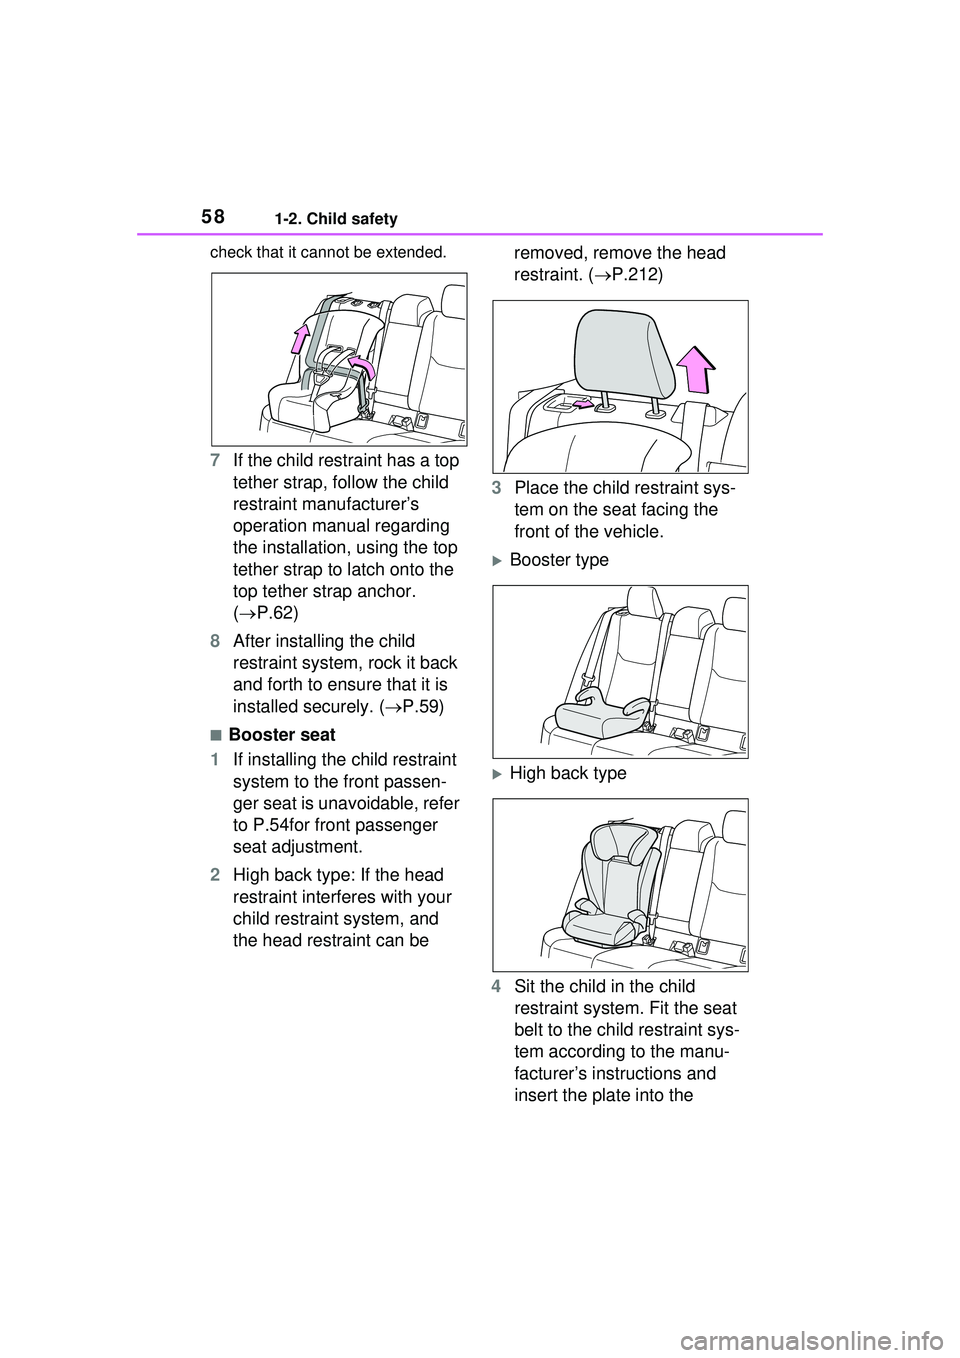 TOYOTA PRIUS PRIME 2023  Owners Manual 581-2. Child safety
check that it cannot be extended.
7If the child restraint has a top 
tether strap, follow the child 
restraint manufacturer’s 
operation manual regarding 
the installation, using